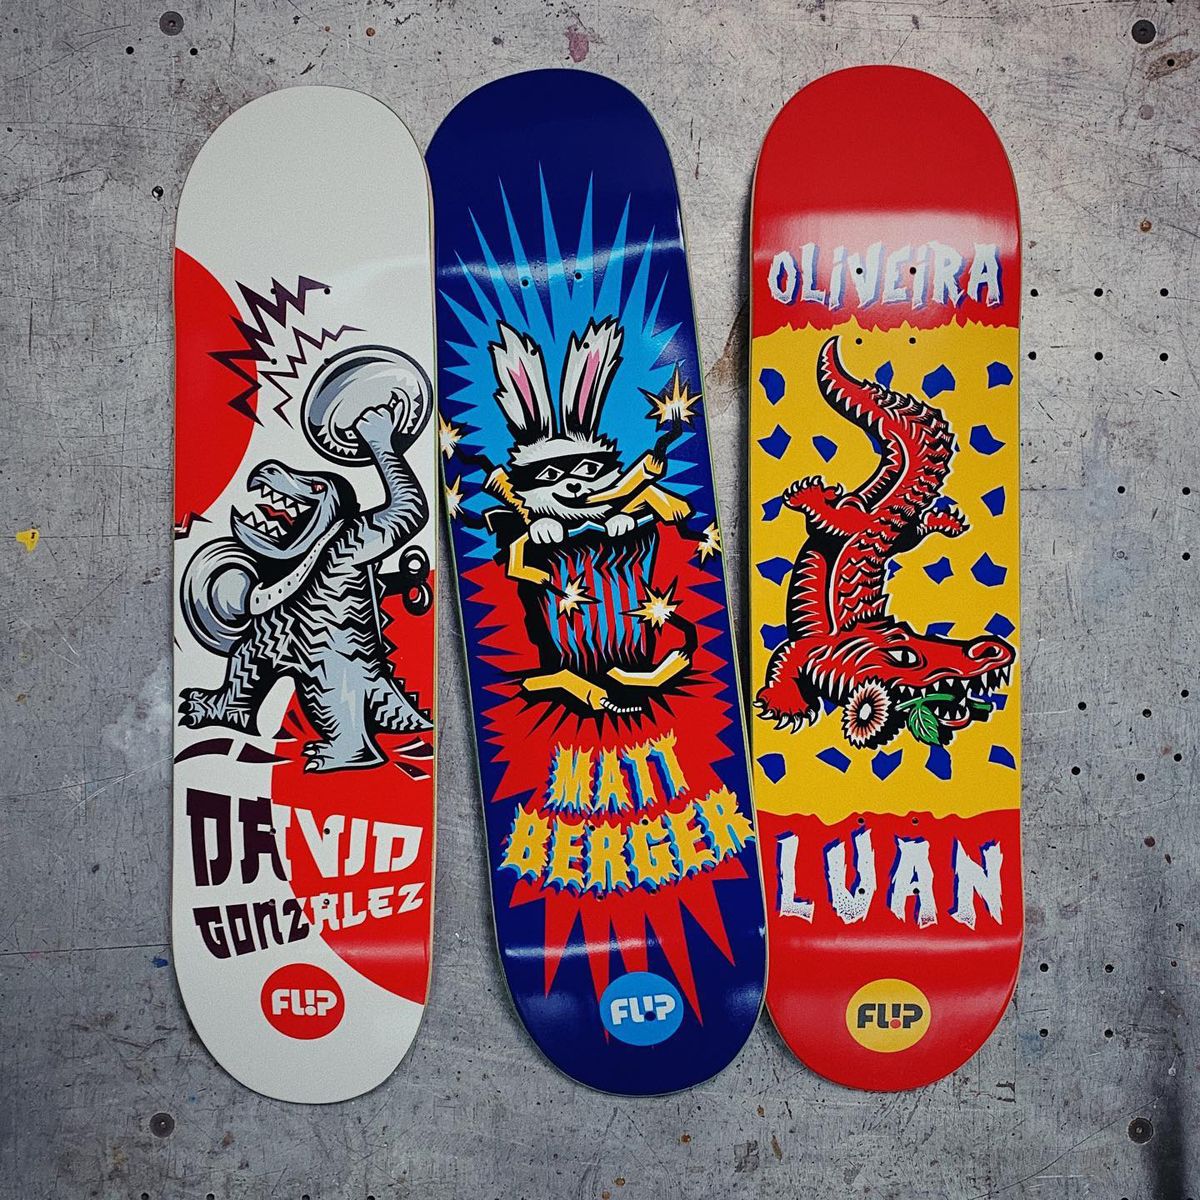 Tin Toy series by Josh for Flip Skateboards